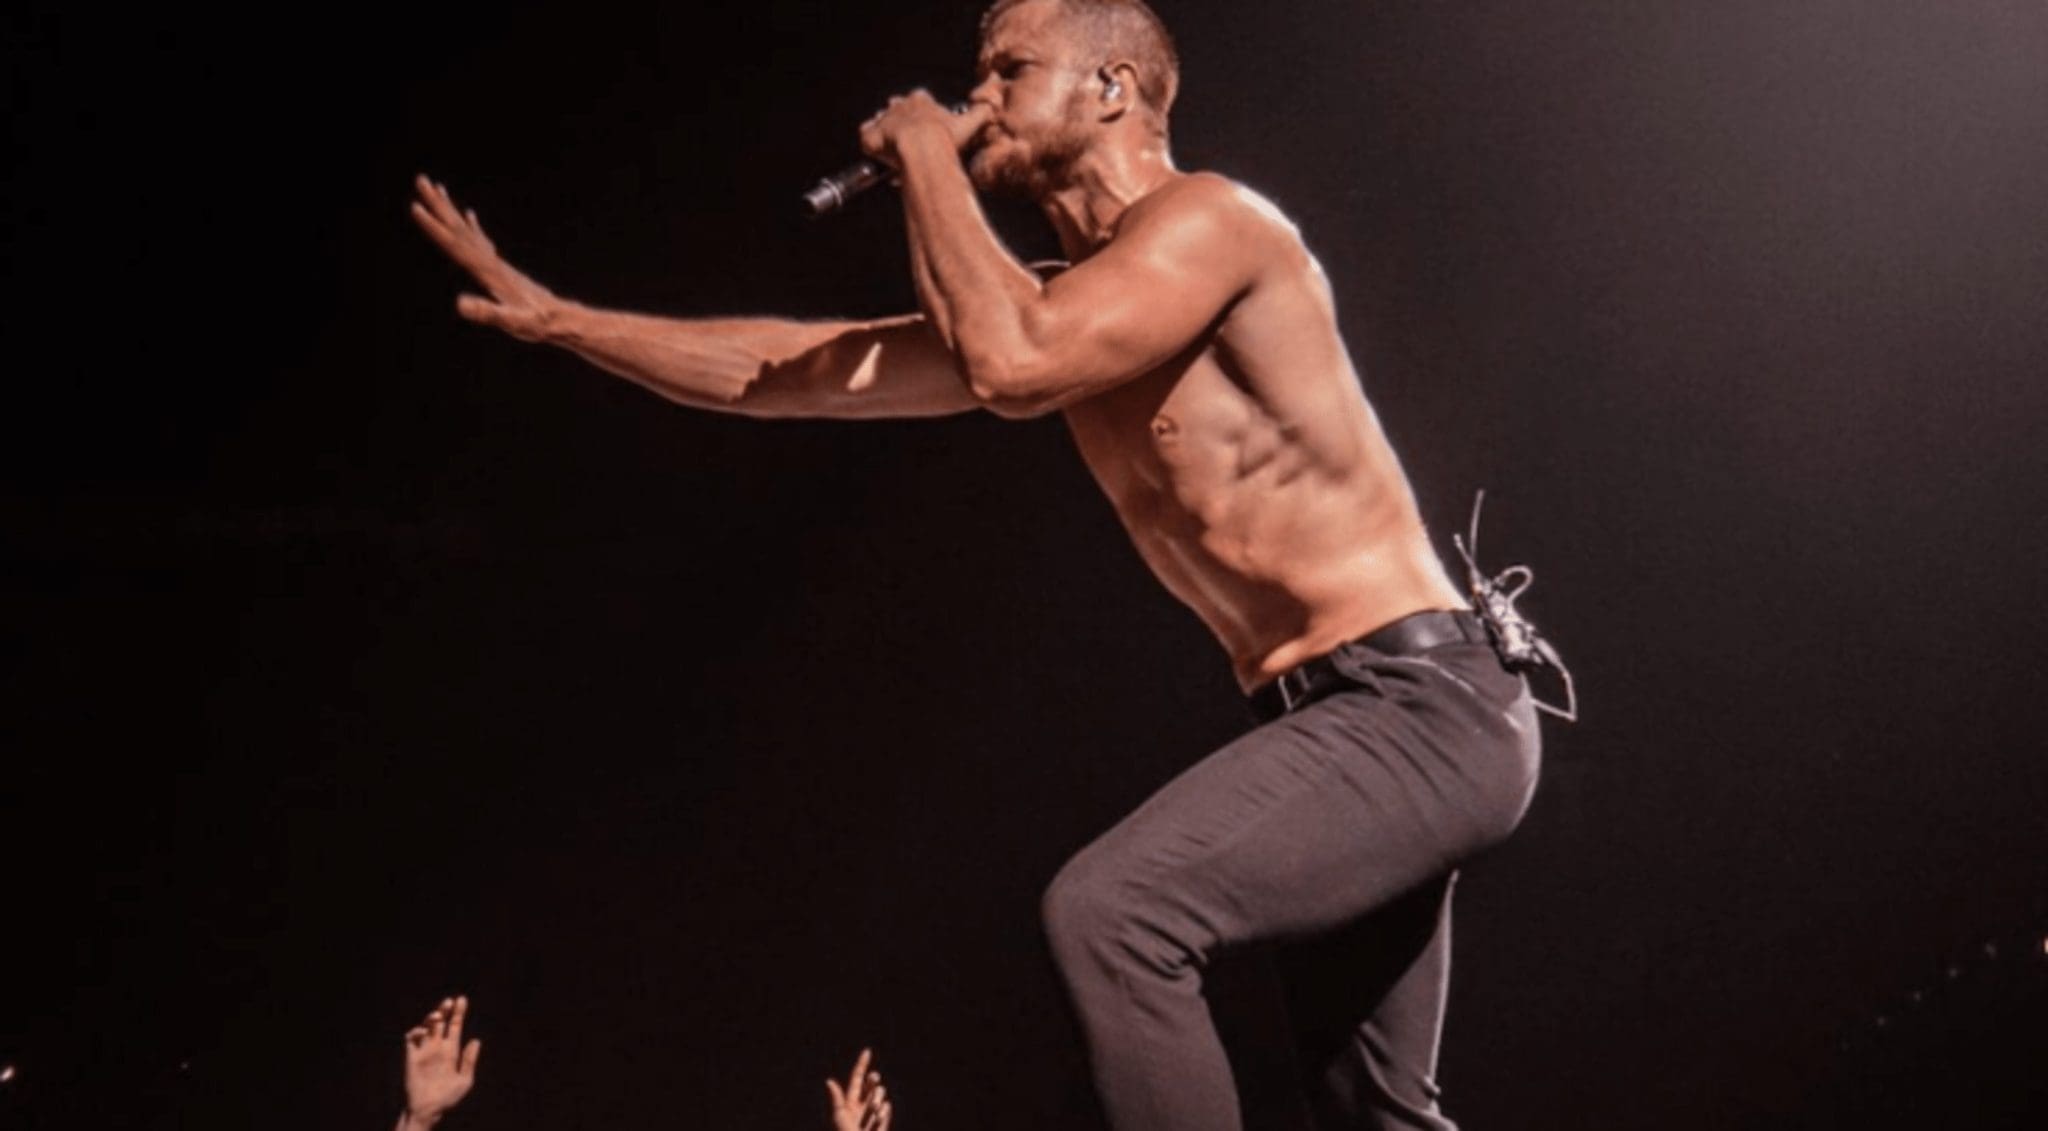 Following the postponement of multiple tour dates, frontman Dan Reynolds provided a shirtless health update.